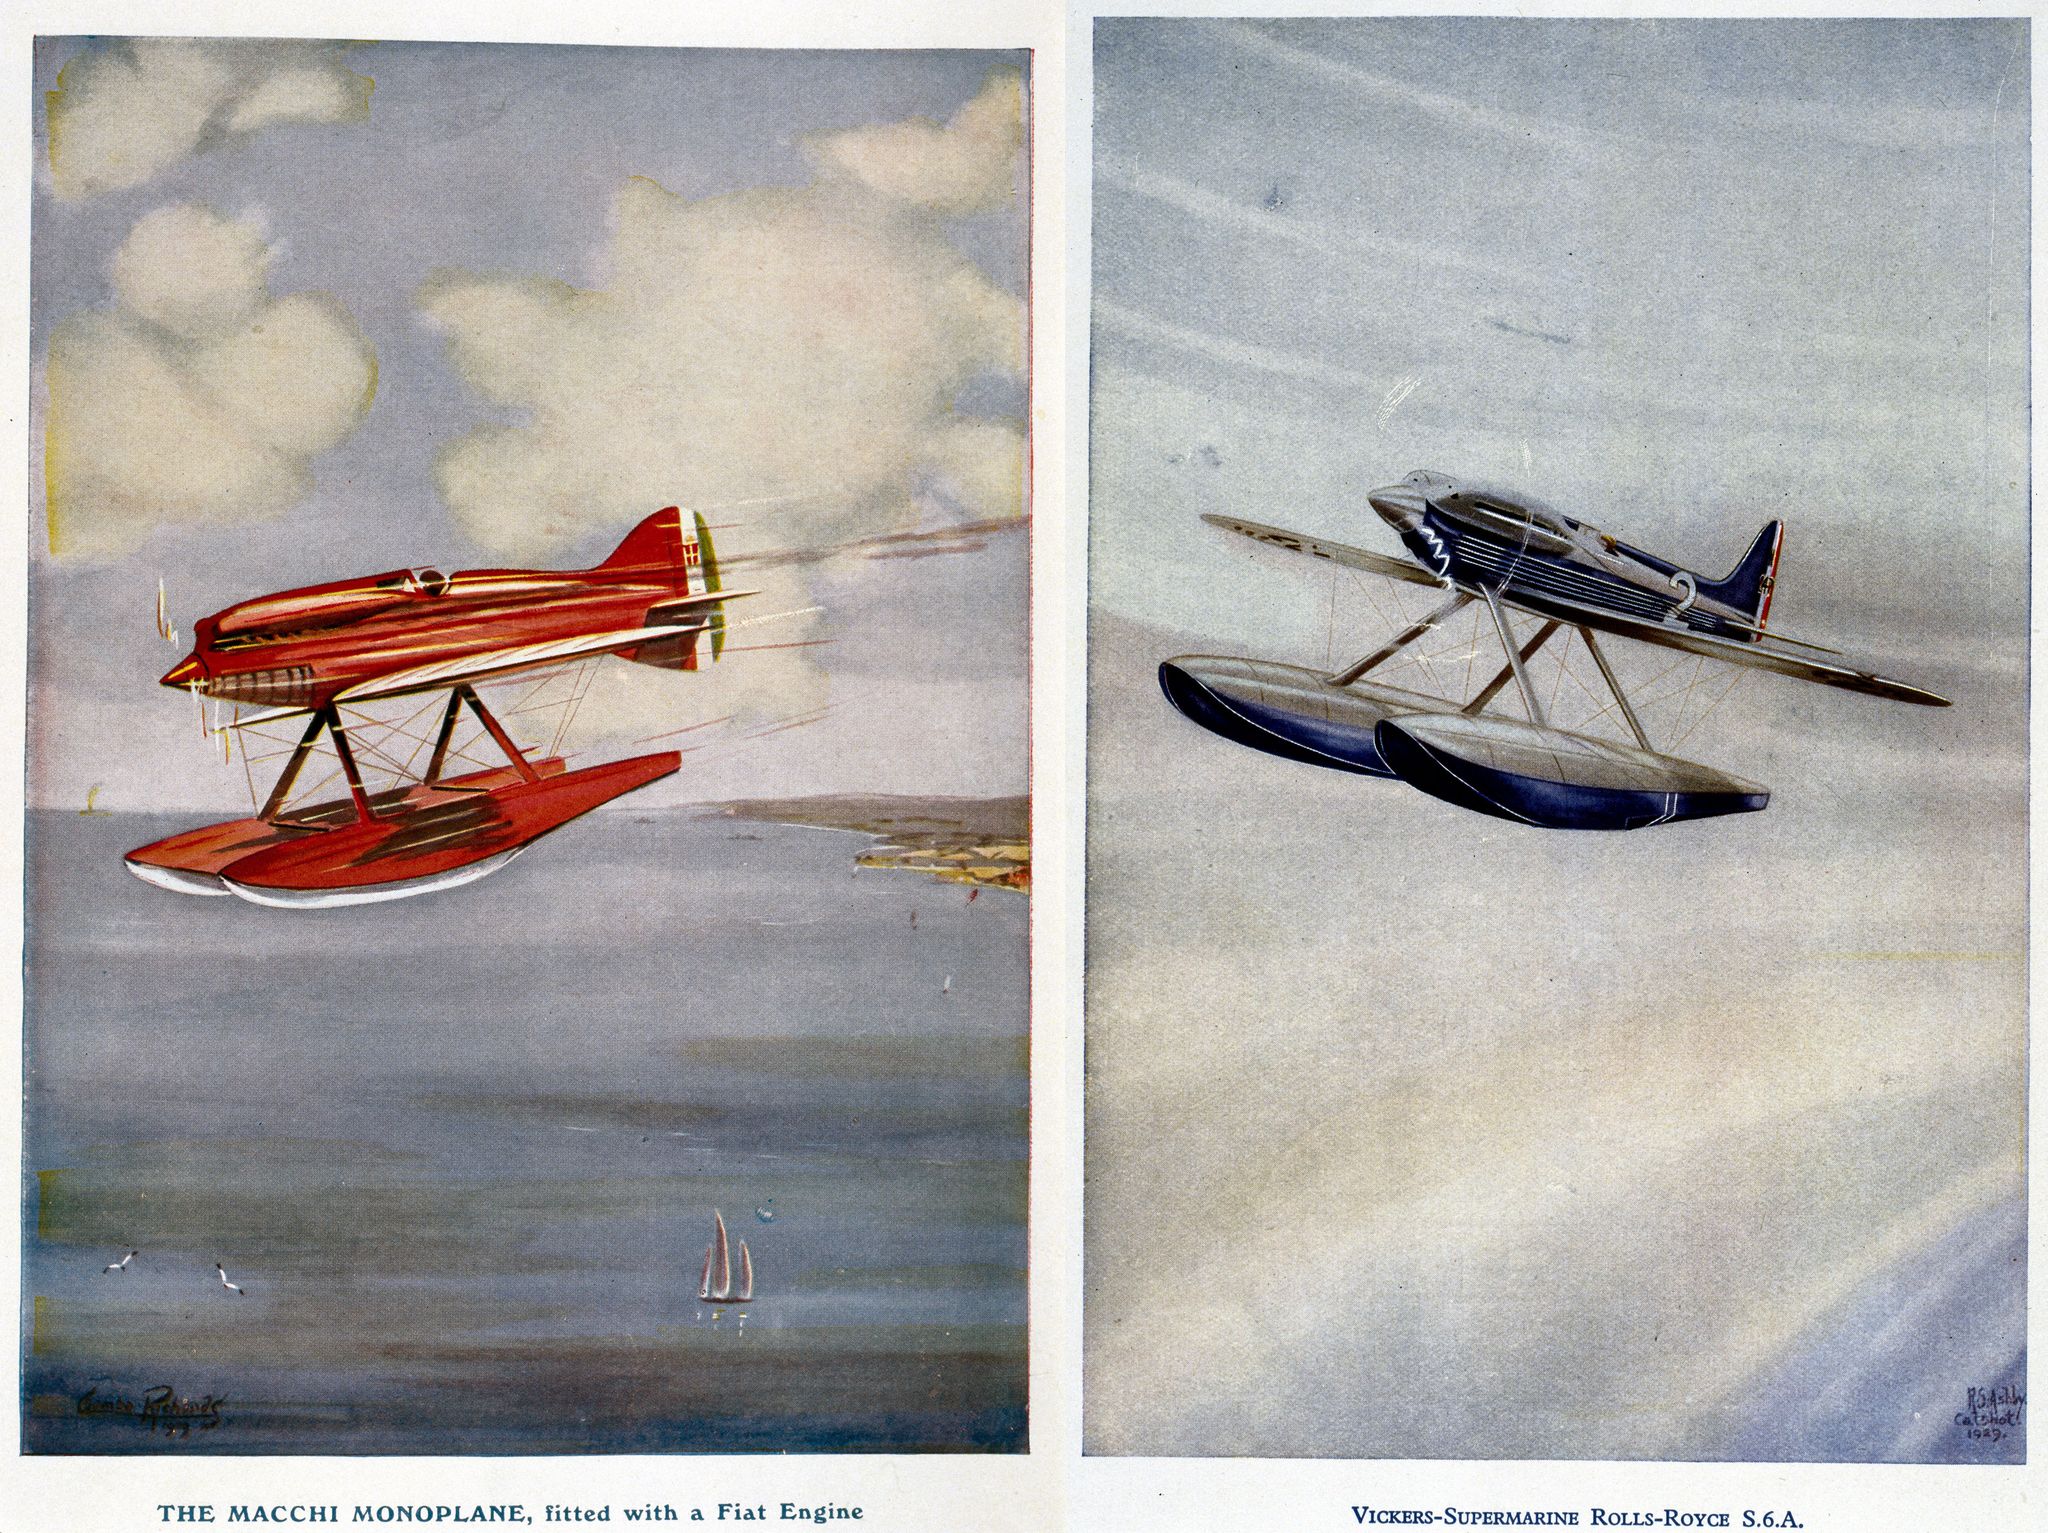 united kingdom   july 12  illustration by rs ashby of a vickers supermarine rolls royce s6a, from the programme for the 1929 schneider trophy contest the schneider trophy race was one of the earliest contests for pilots the race, sponsored by jacques schneider, was intended to encourage seaplane development the event was always keenly fought and led to many pioneering innovations in aircraft design and engine power twelve contests were held between 1913 and 1931 in england, italy, france and the united states the 1929 event took place at calshot, near southampton, on 6th 7th september and was won by a supermarine s6a piloted by henry waghorn  photo by ssplgetty images